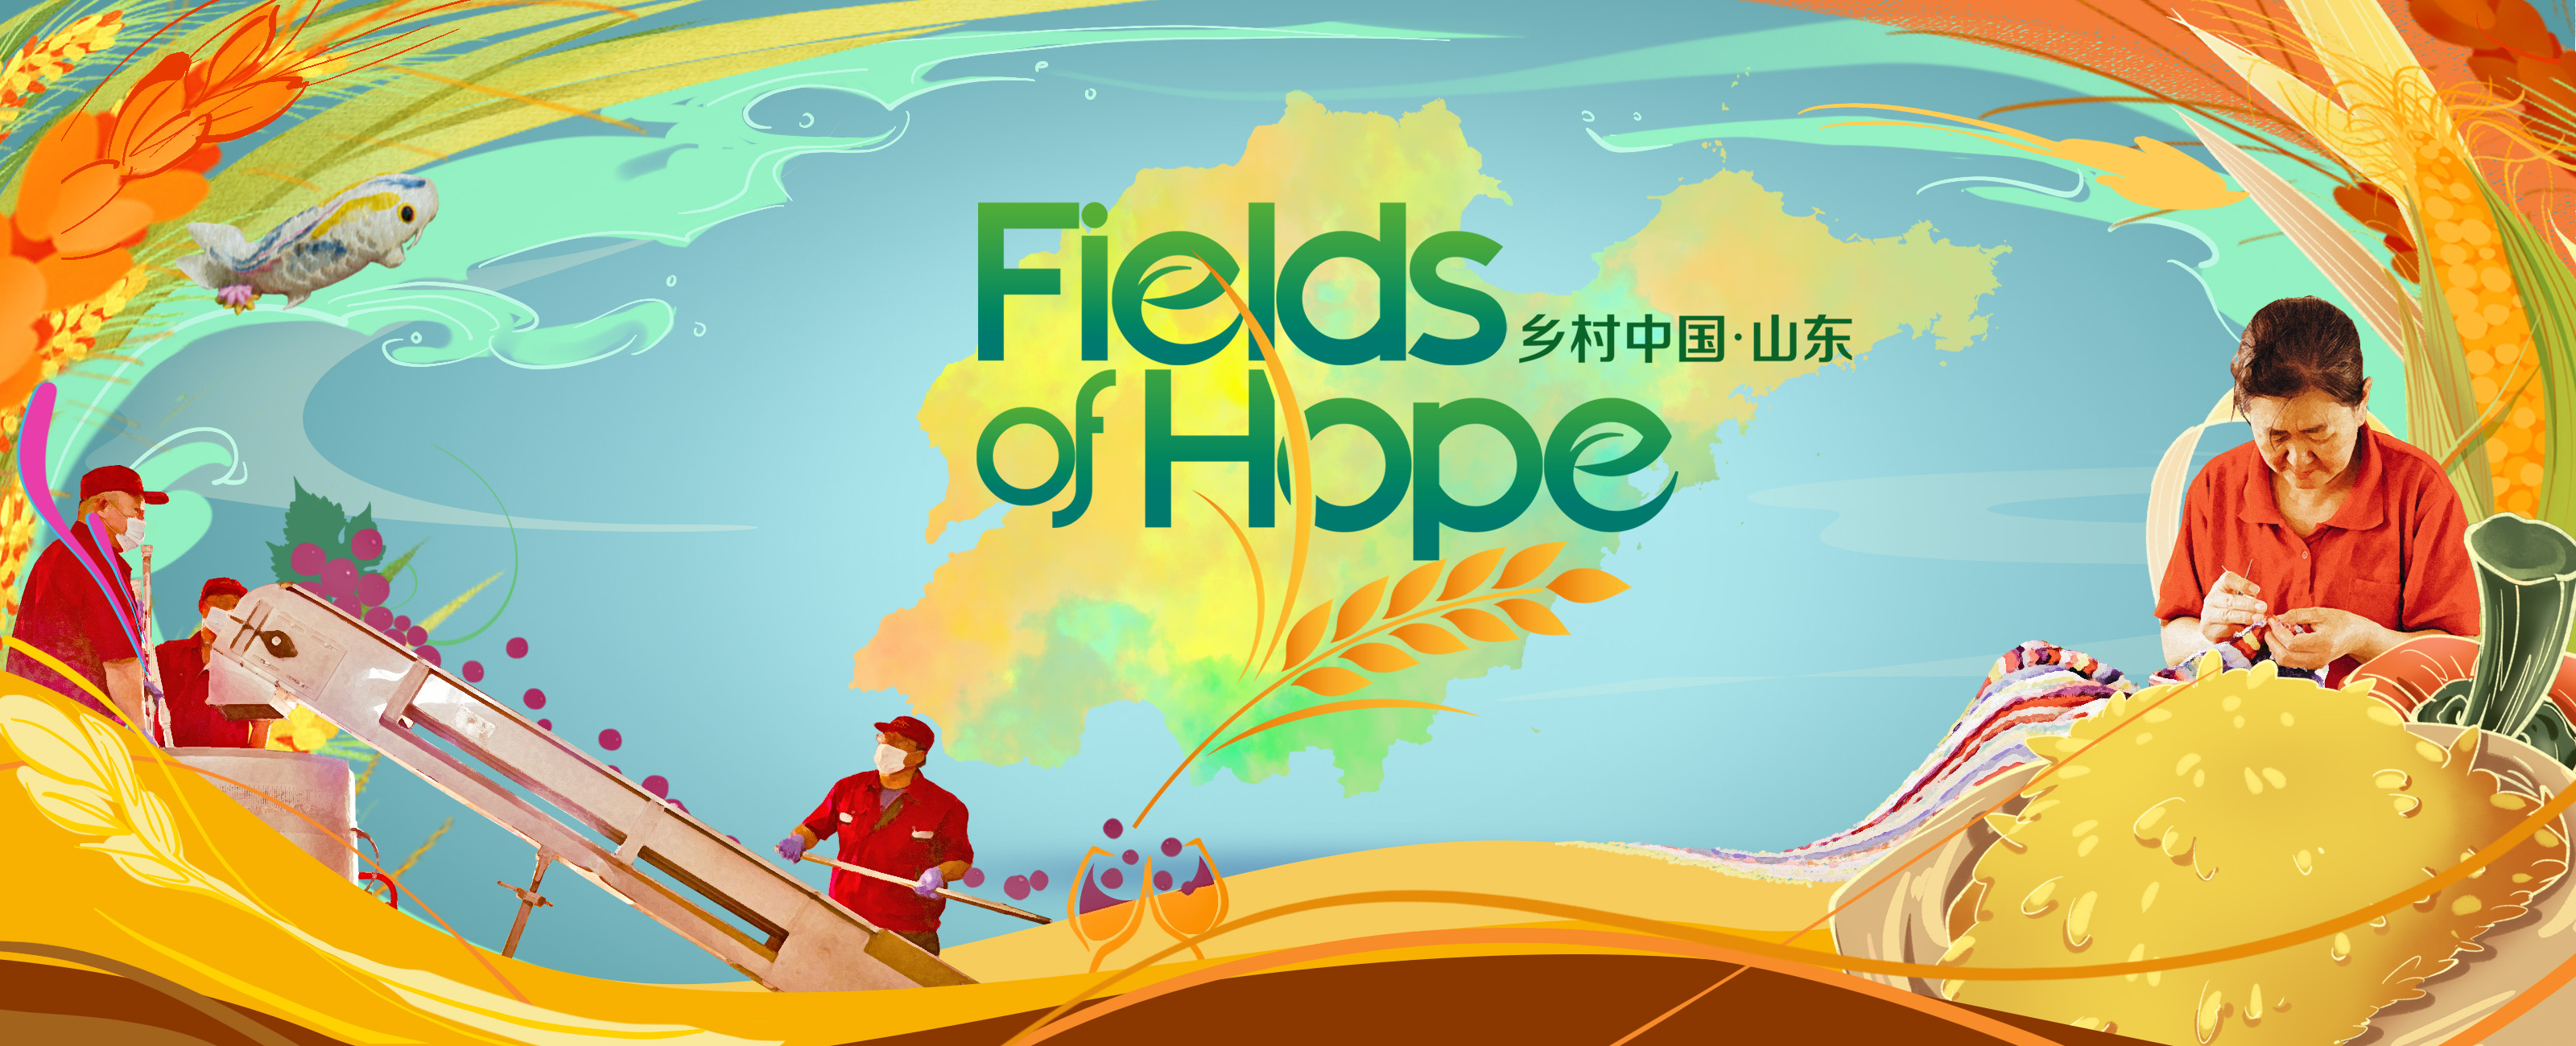 banner for the report of fields of hope